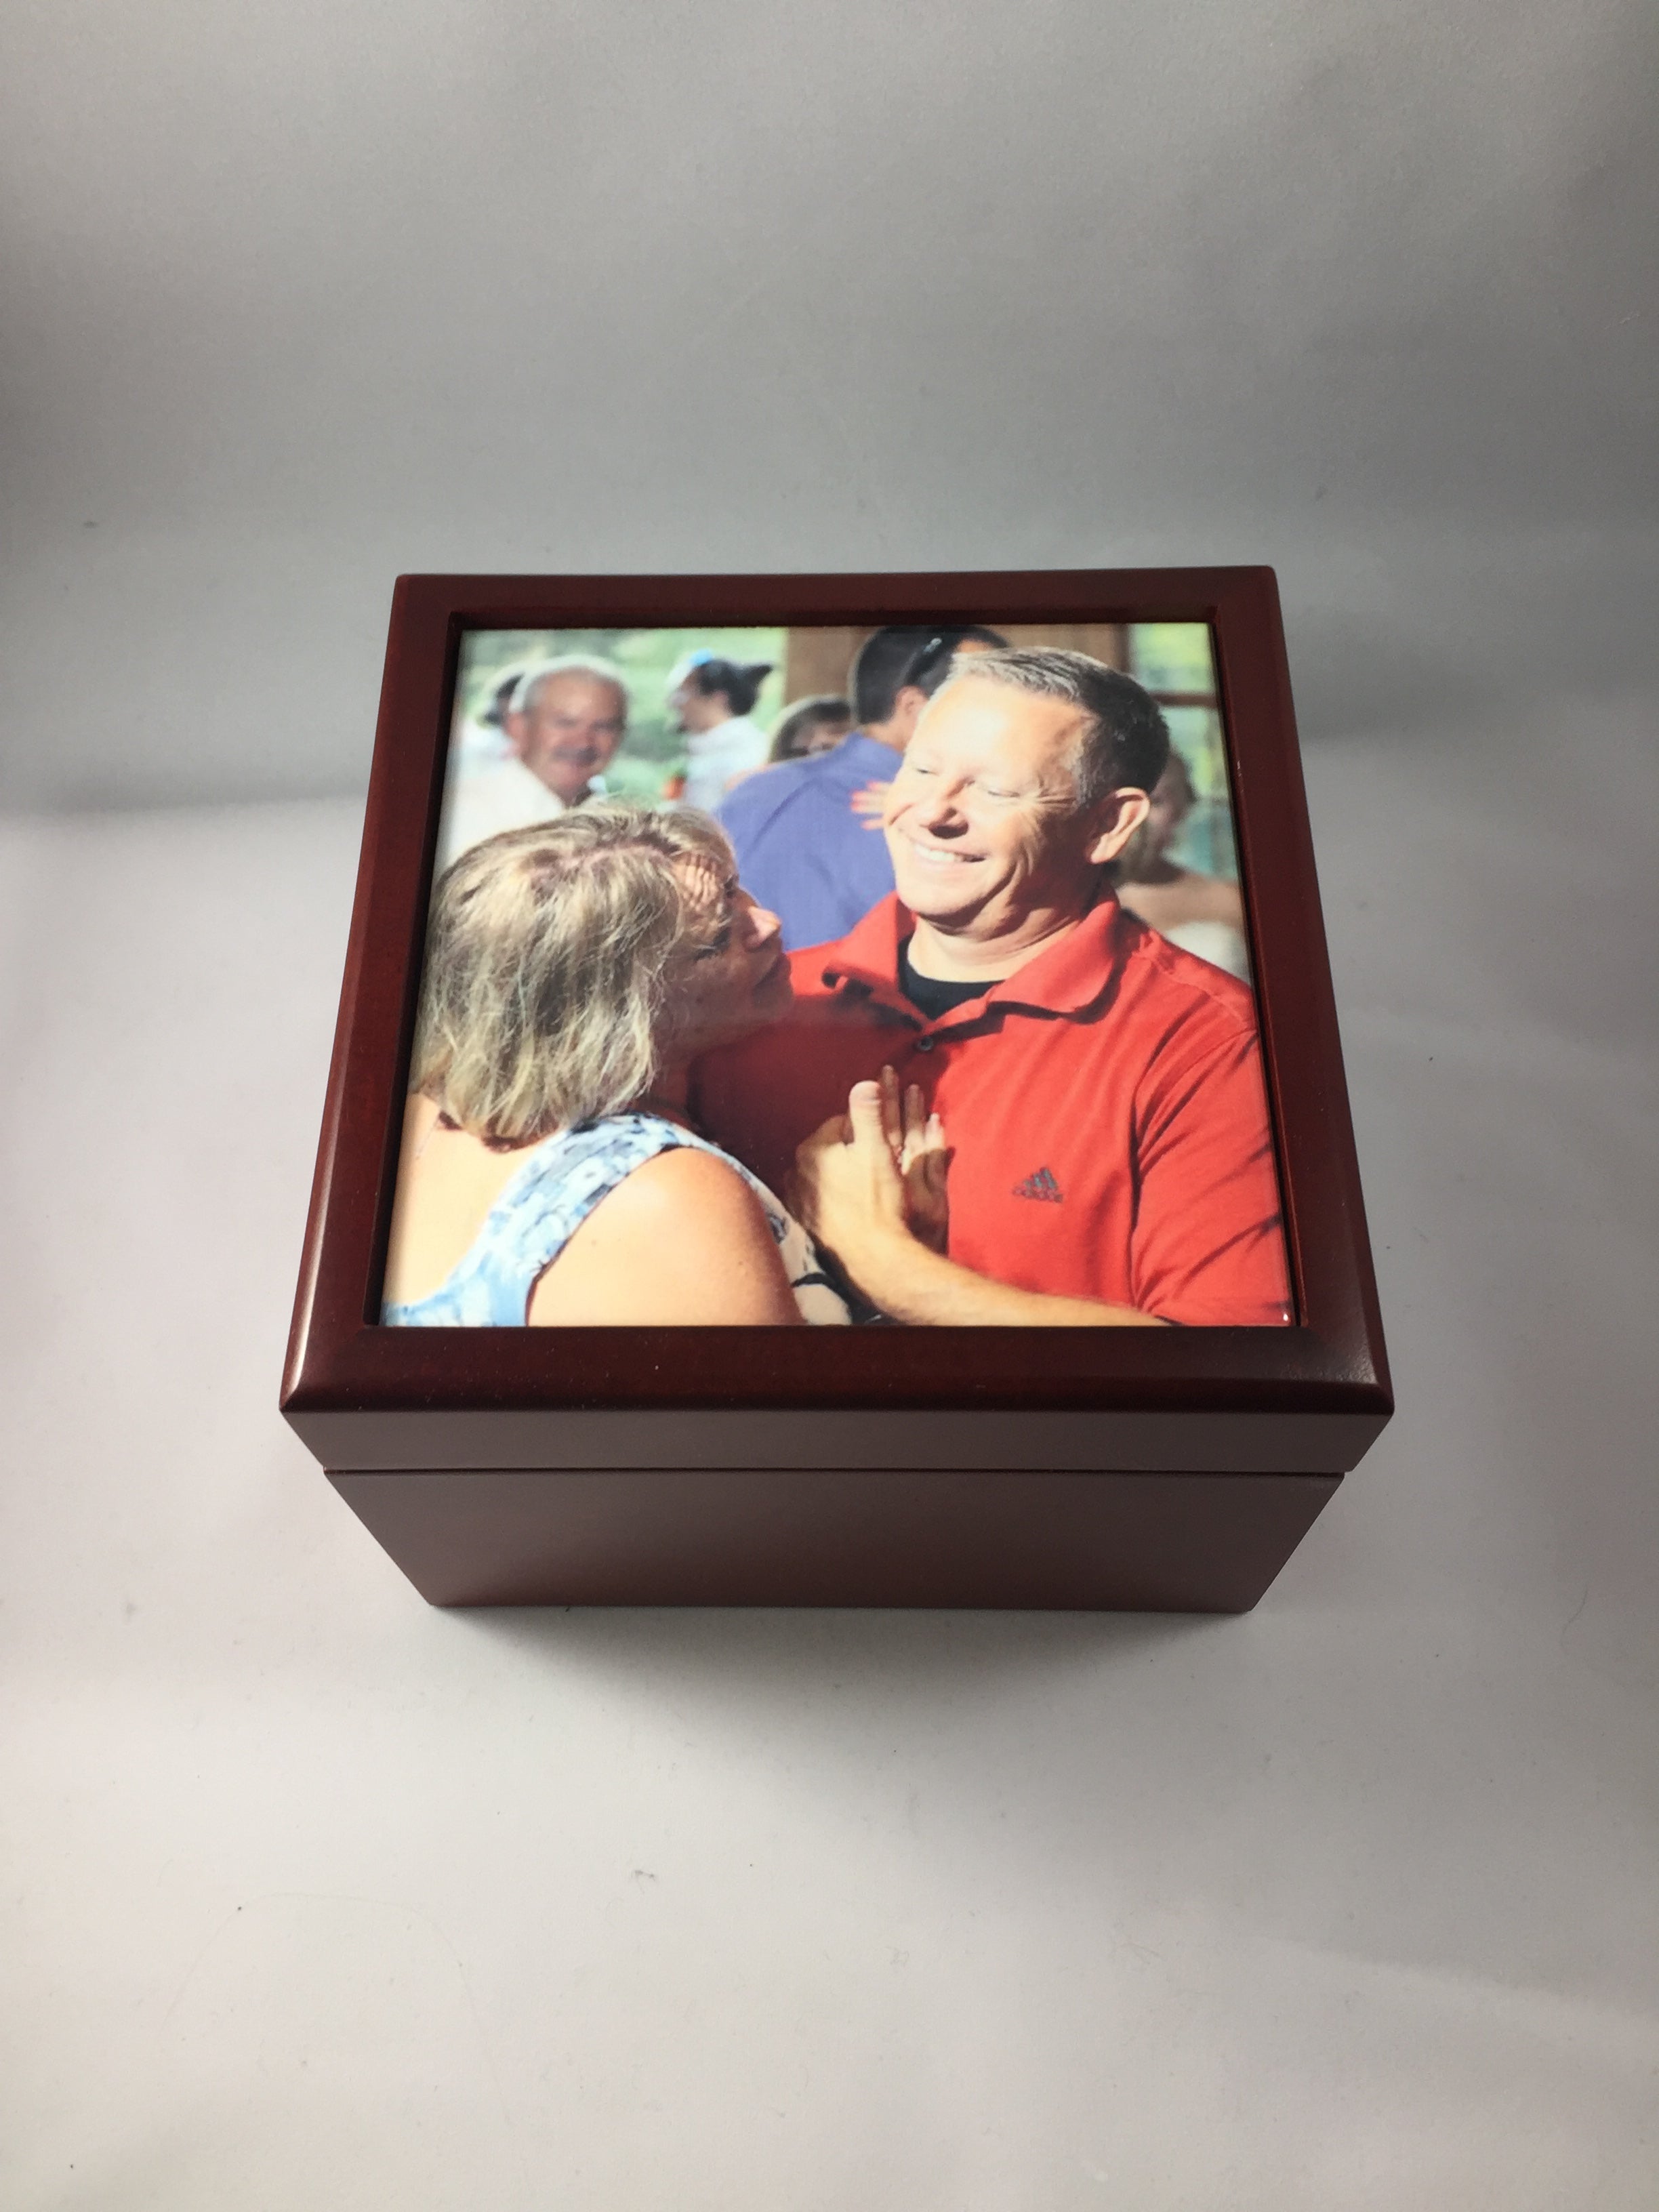 Design Your Own Personalized Keepsake Box